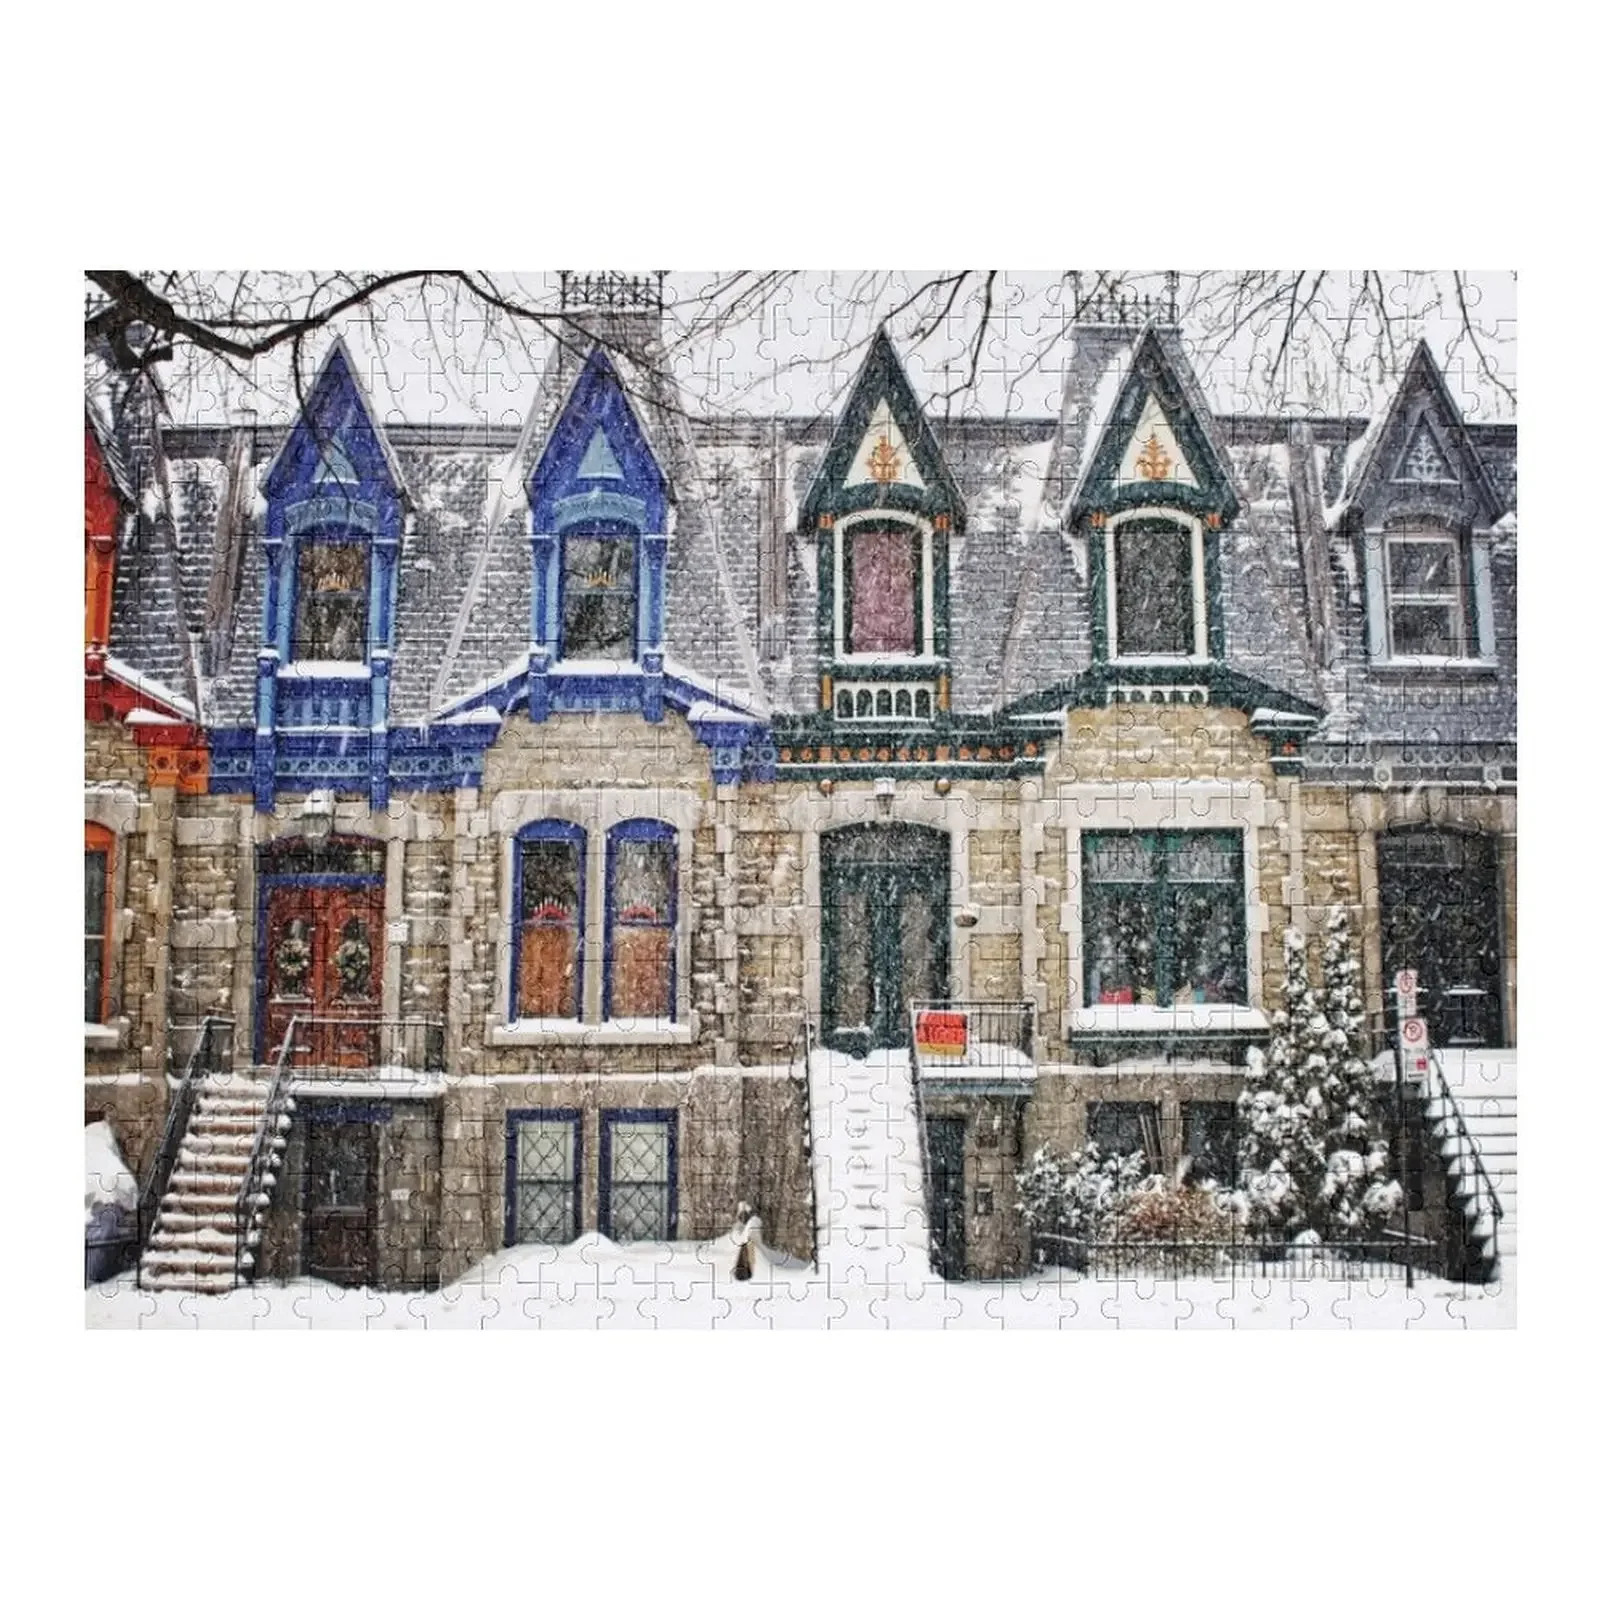 Montreal Victorian Architecture - The Enchanted Winter Jigsaw Puzzle Wooden Boxes Wooden Decor Paintings Puzzle bob manders architecture